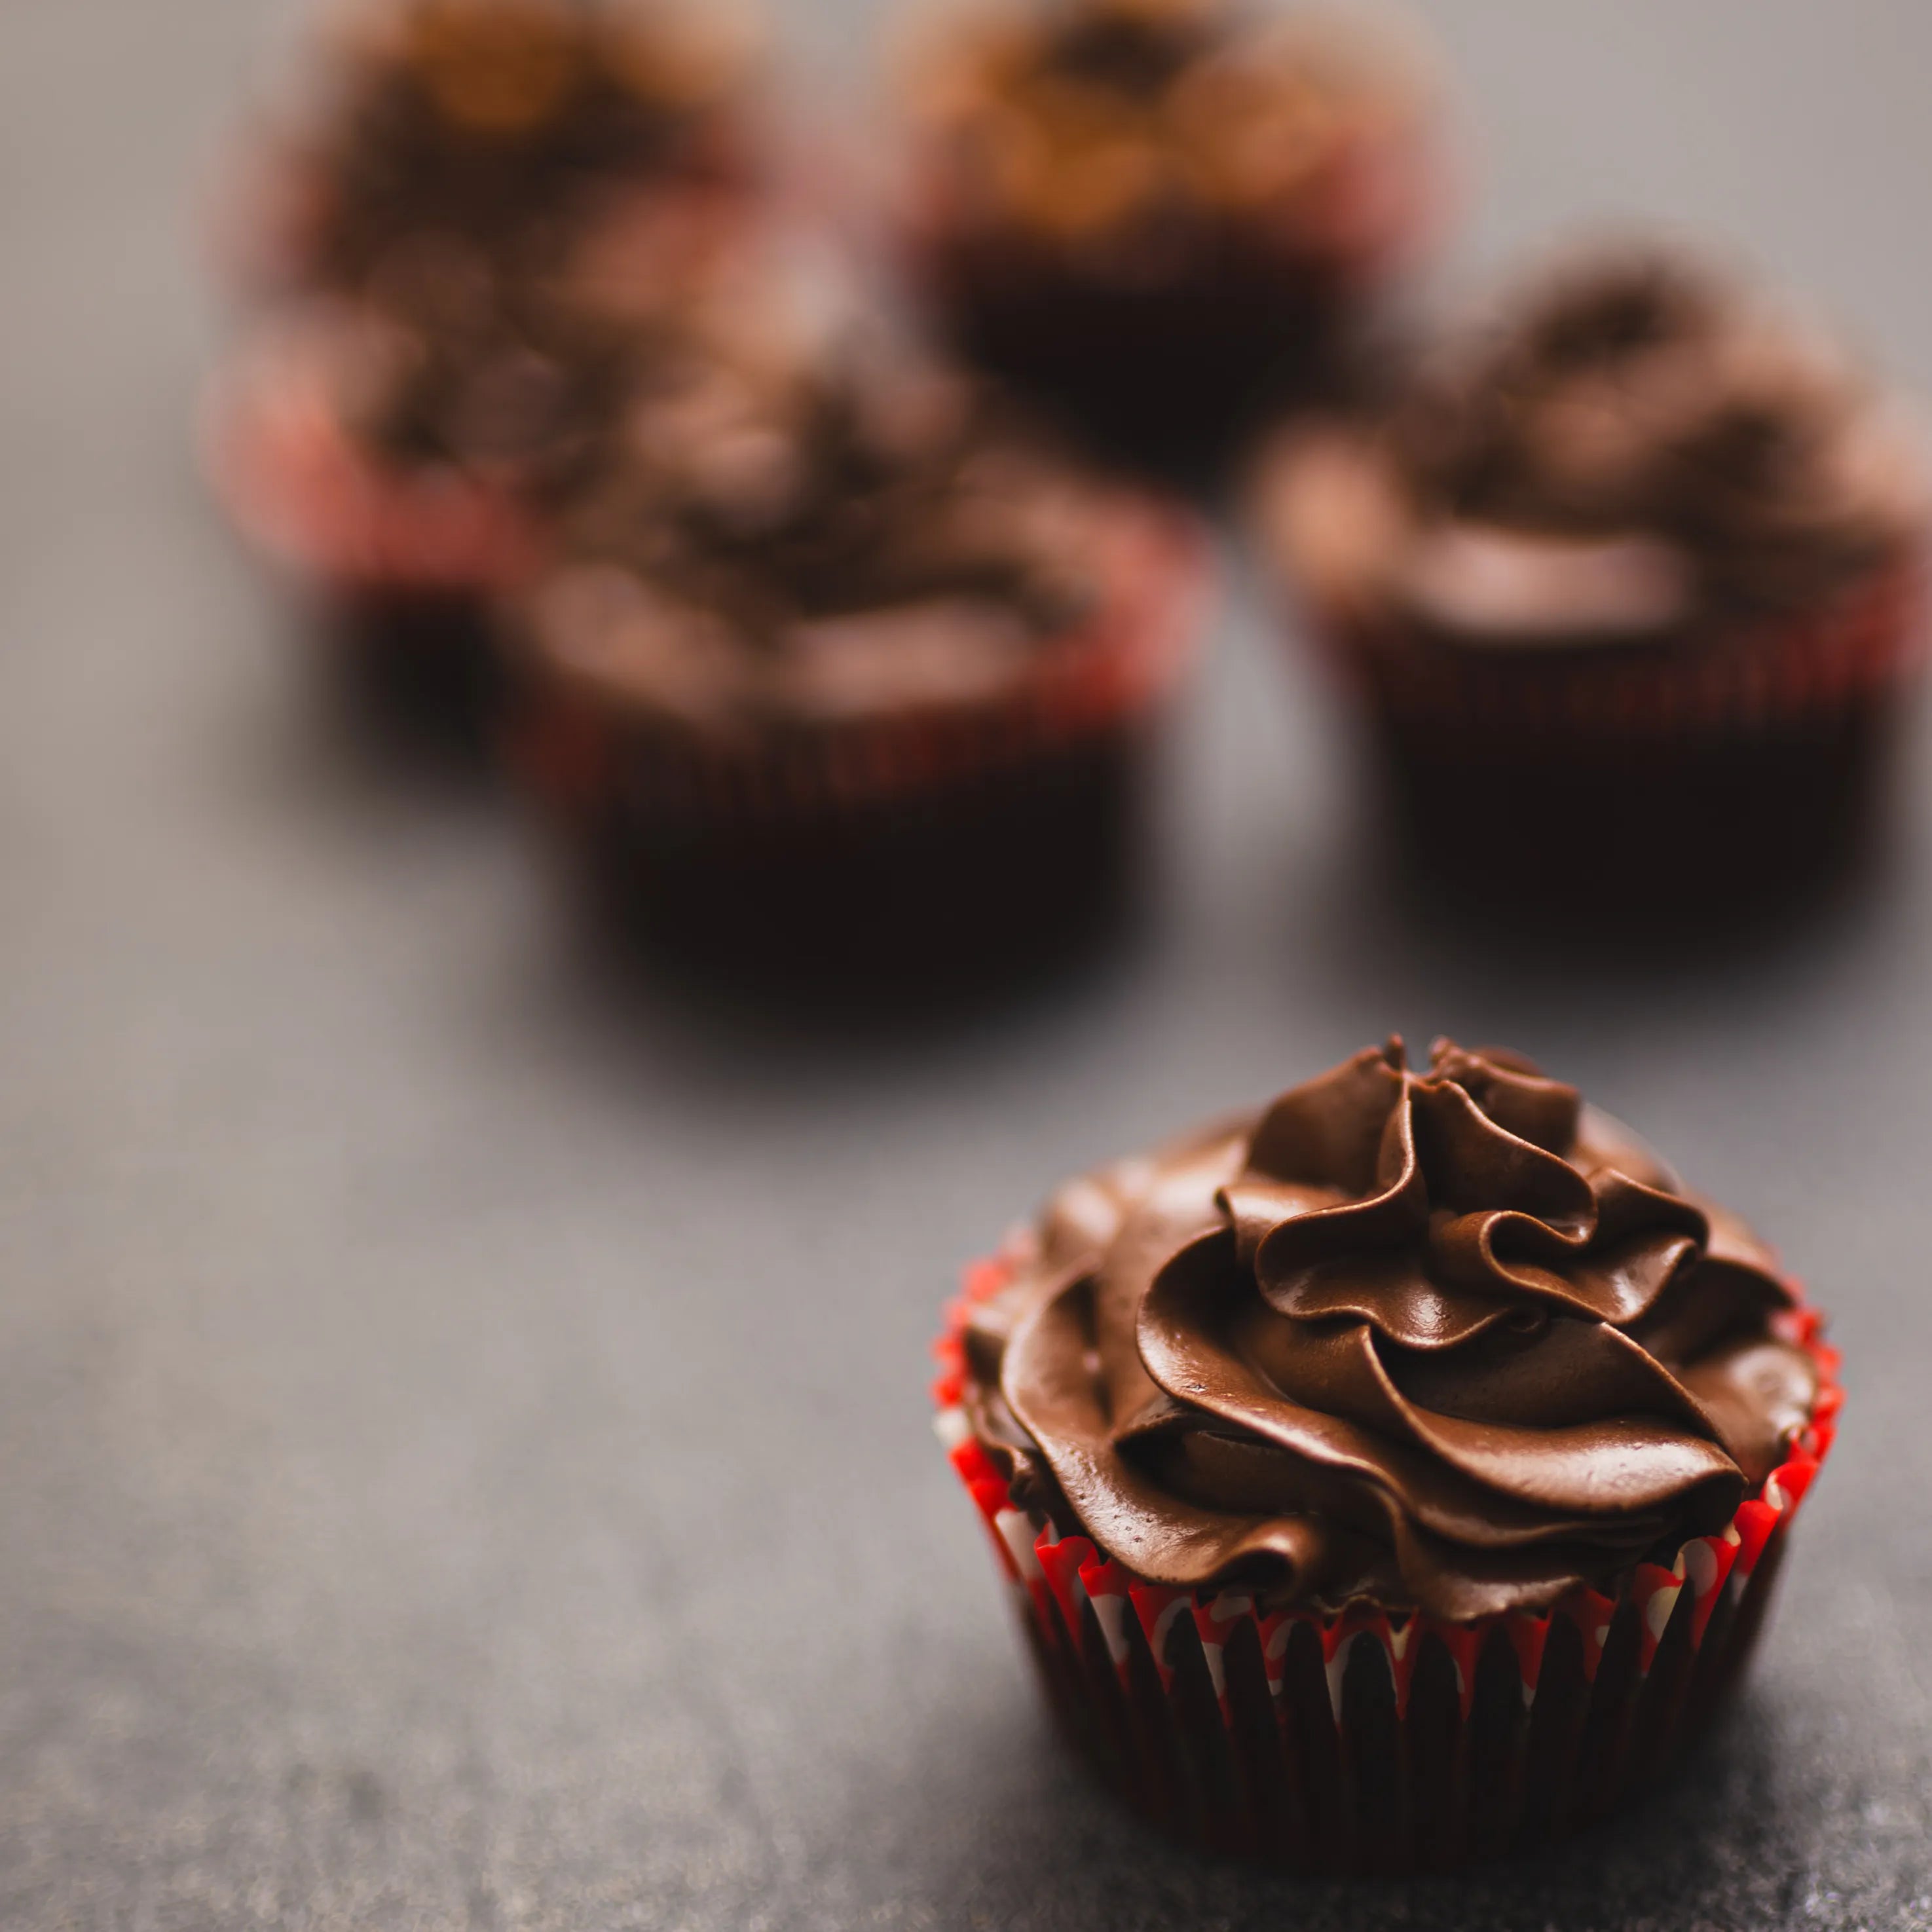 Moist chocolate cupcakes topped with chocolate coffee ganache